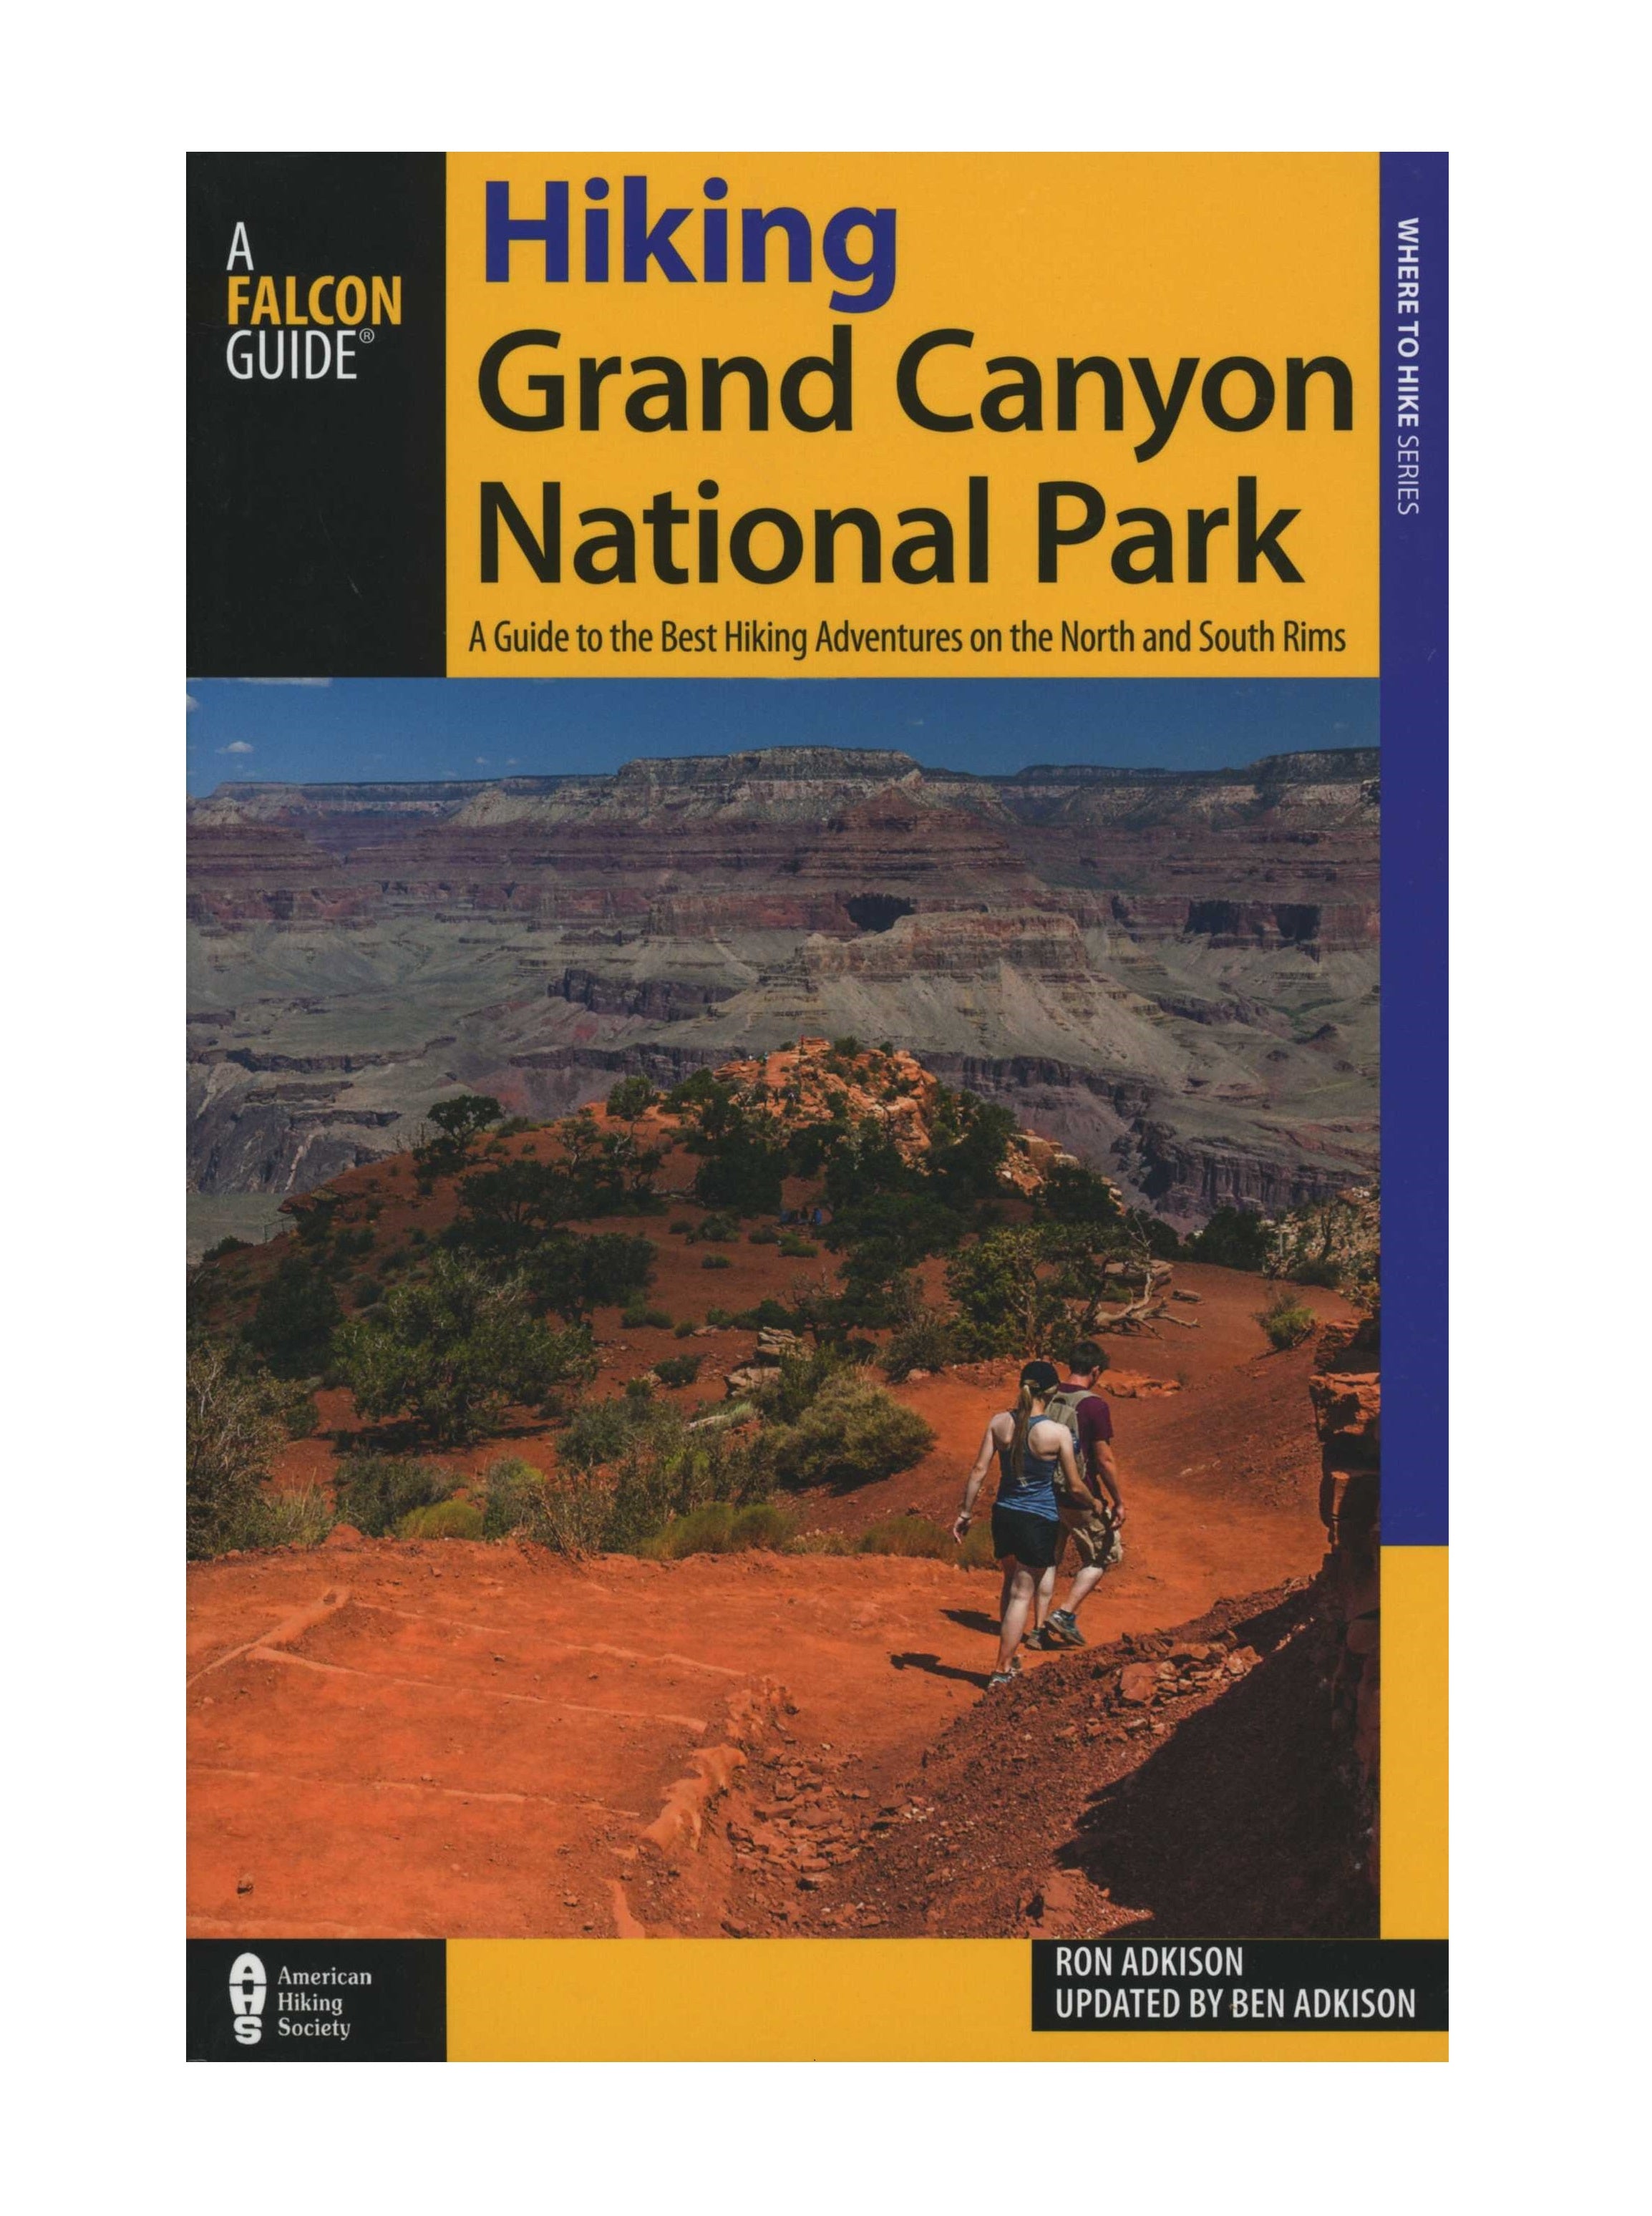 Hiking Grand Canyon National Park: A Falcon Guide